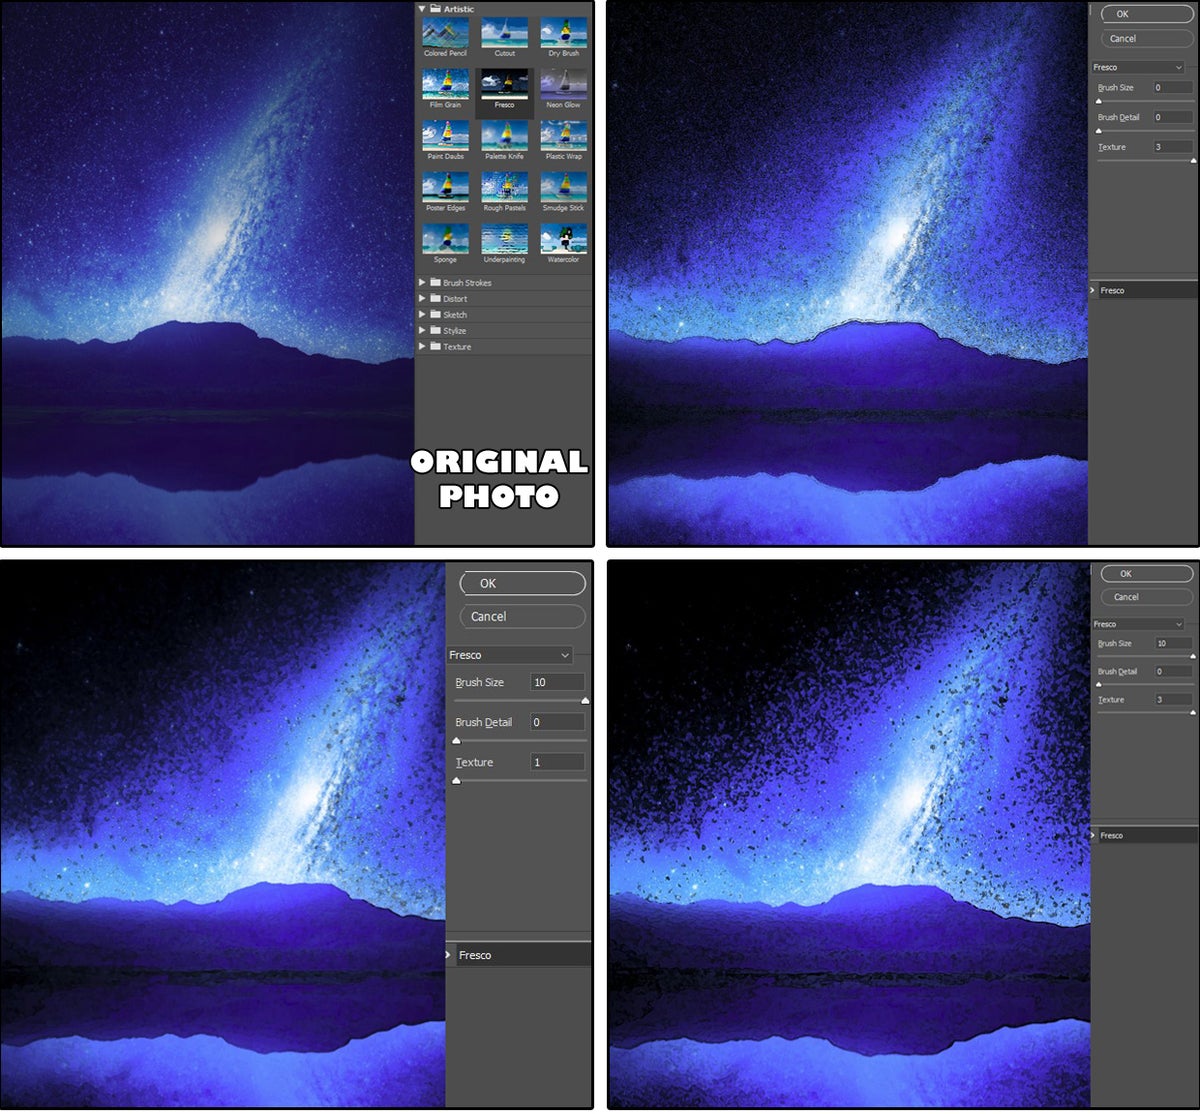 How Photoshop Artistic Filters work, with examples of our favorites